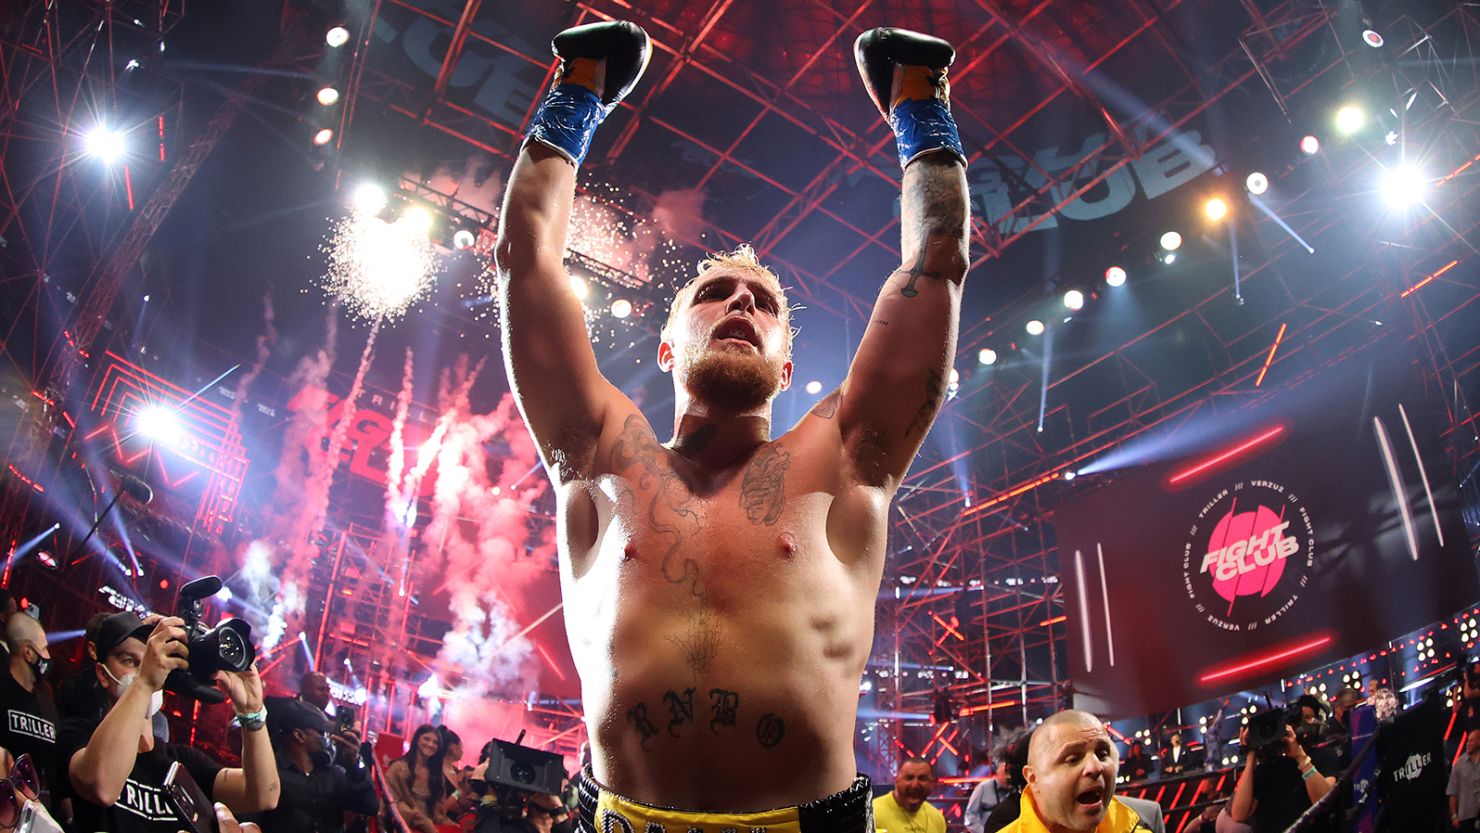 Jake Paul celebrates after defeating Ben Askren in their cruiserweight bout during Triller Fight Club at Mercedes-Benz Stadium on April 17, 2021 in Atlanta.